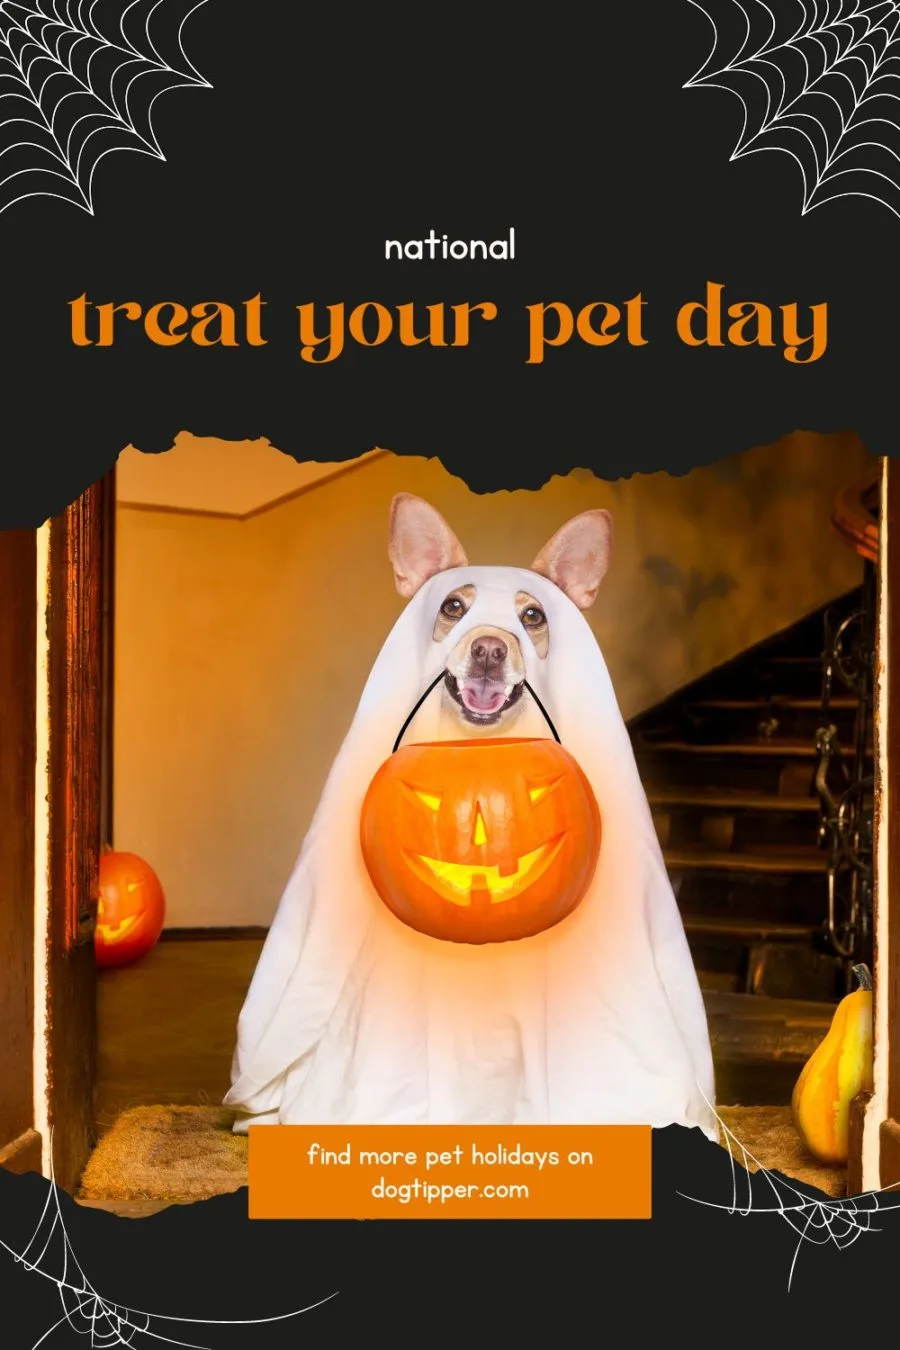 National Treat Your Pet Day - October 30